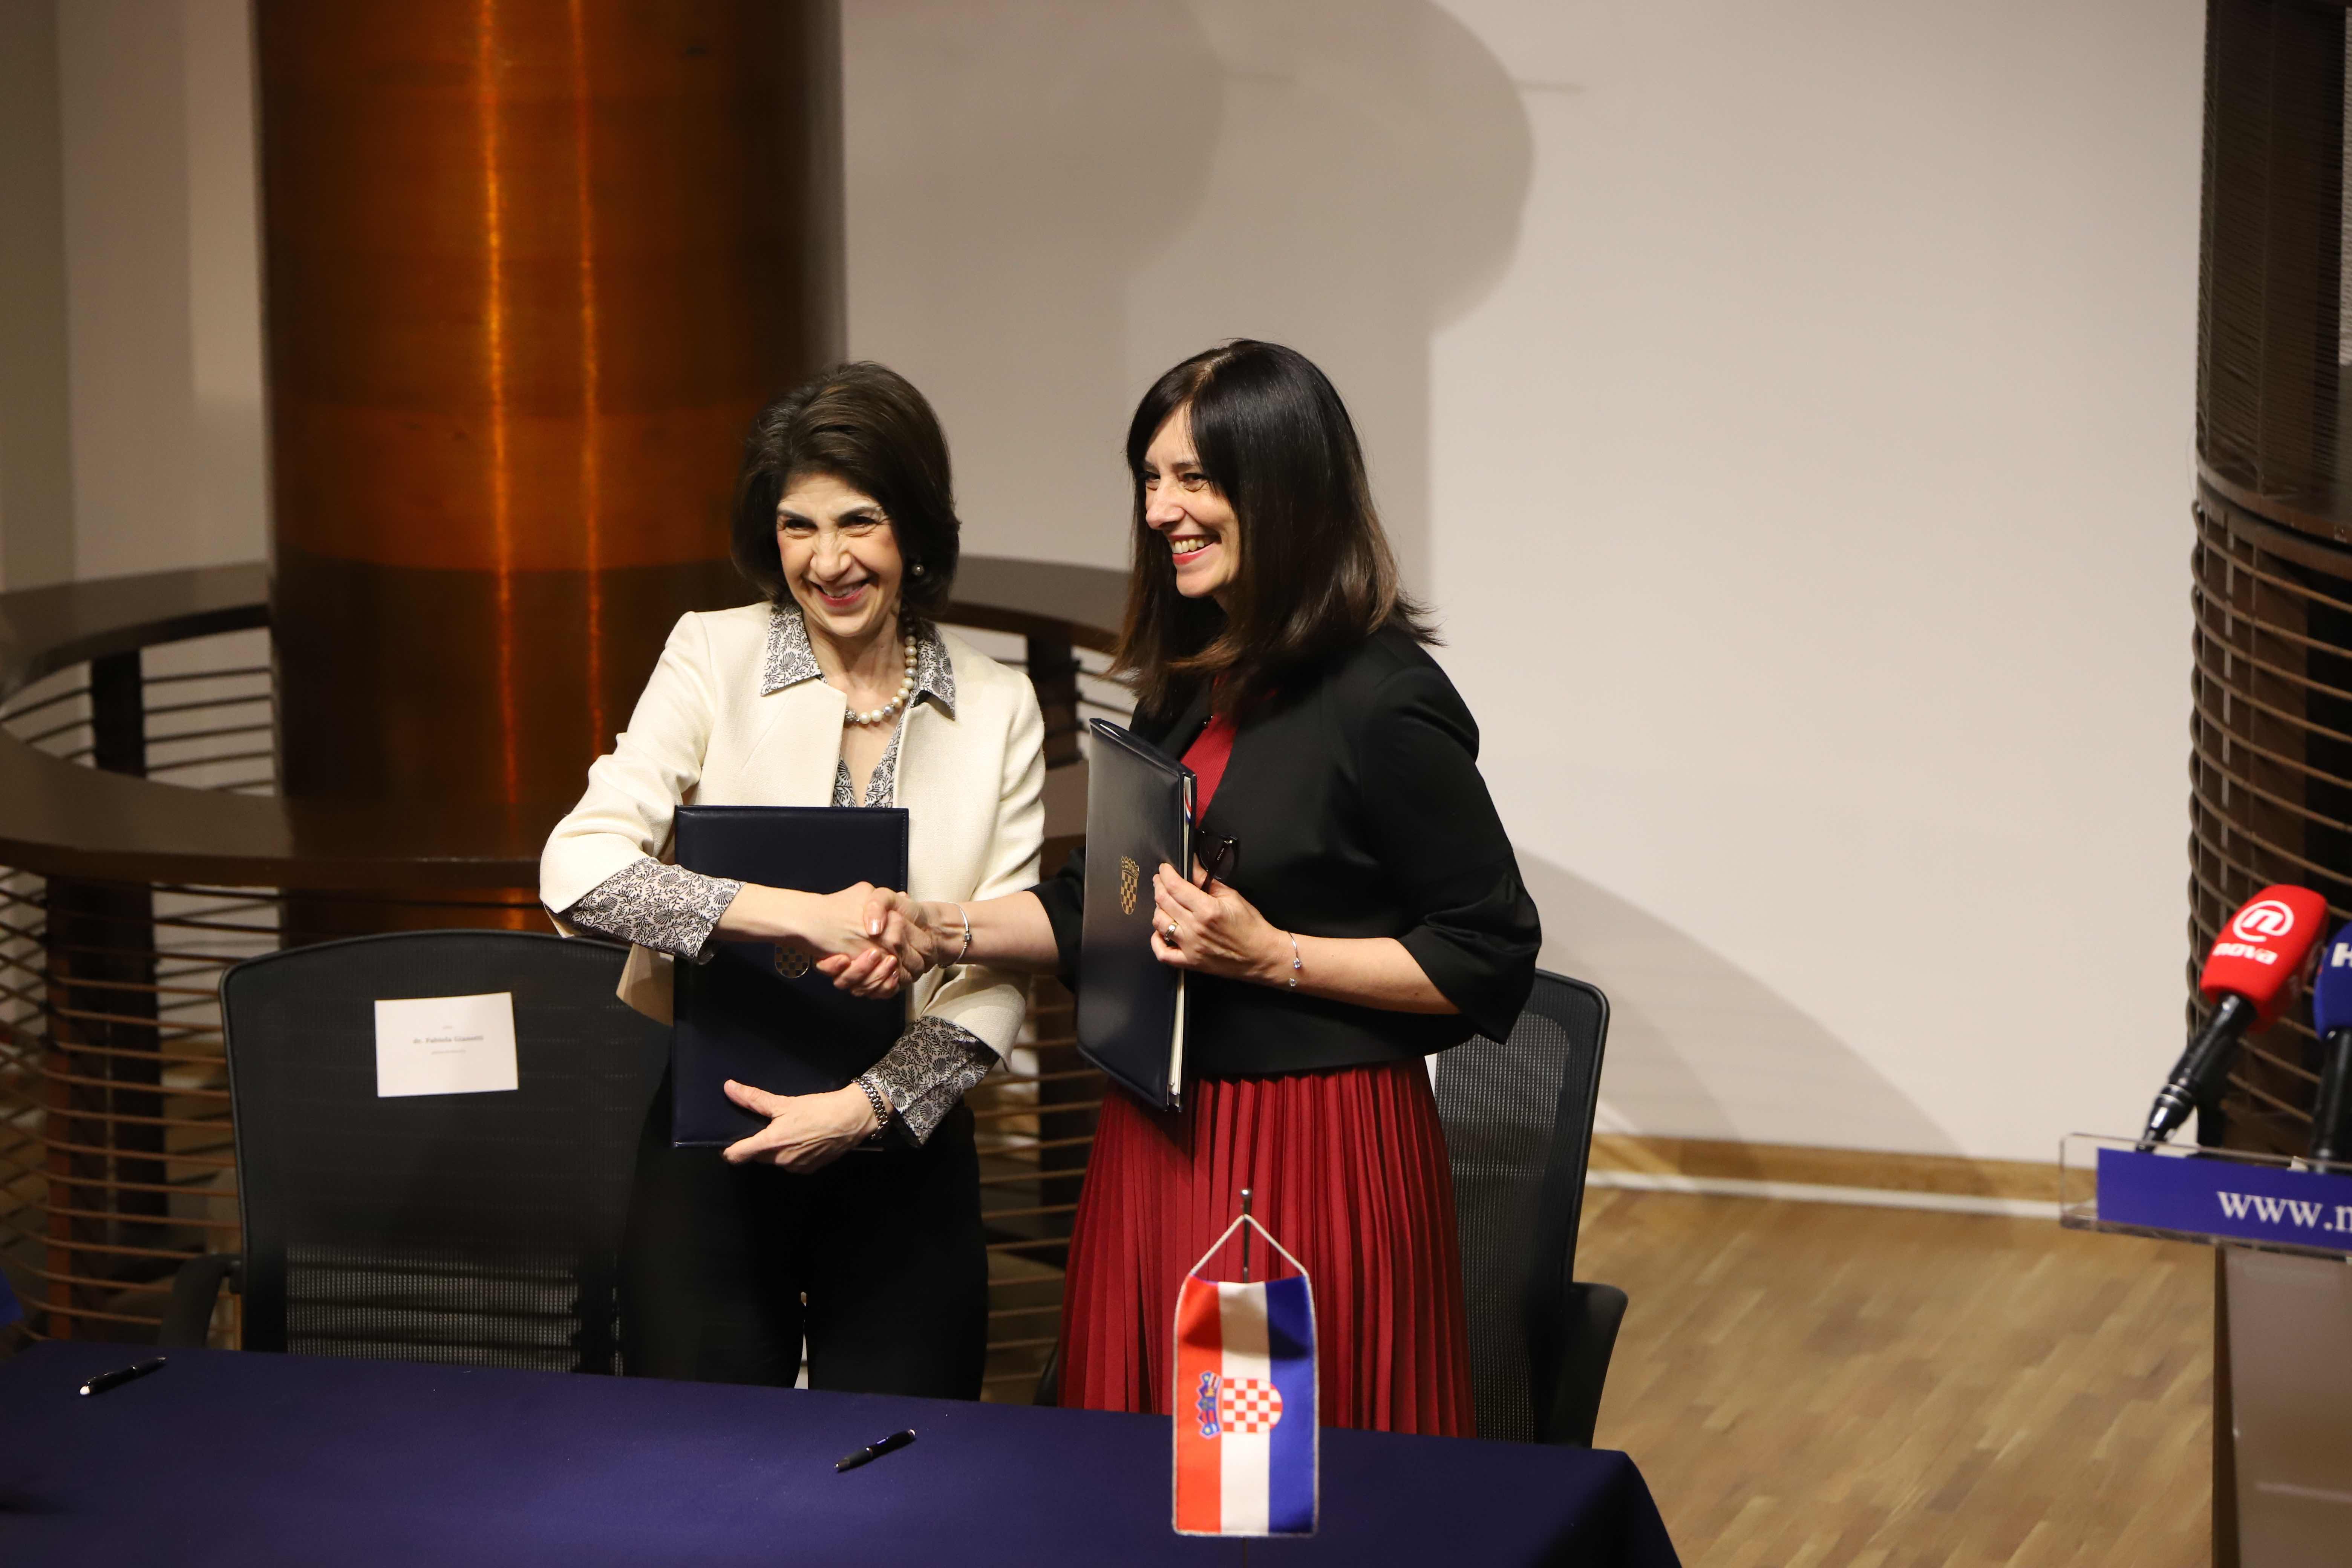 Fabiola Gianotti, CERN Director-General, and Blaženka Divjak, Minister of Science and Education of the Republic of Croatia, signed an Agreement admitting Croatia as an Associate Member of CERN